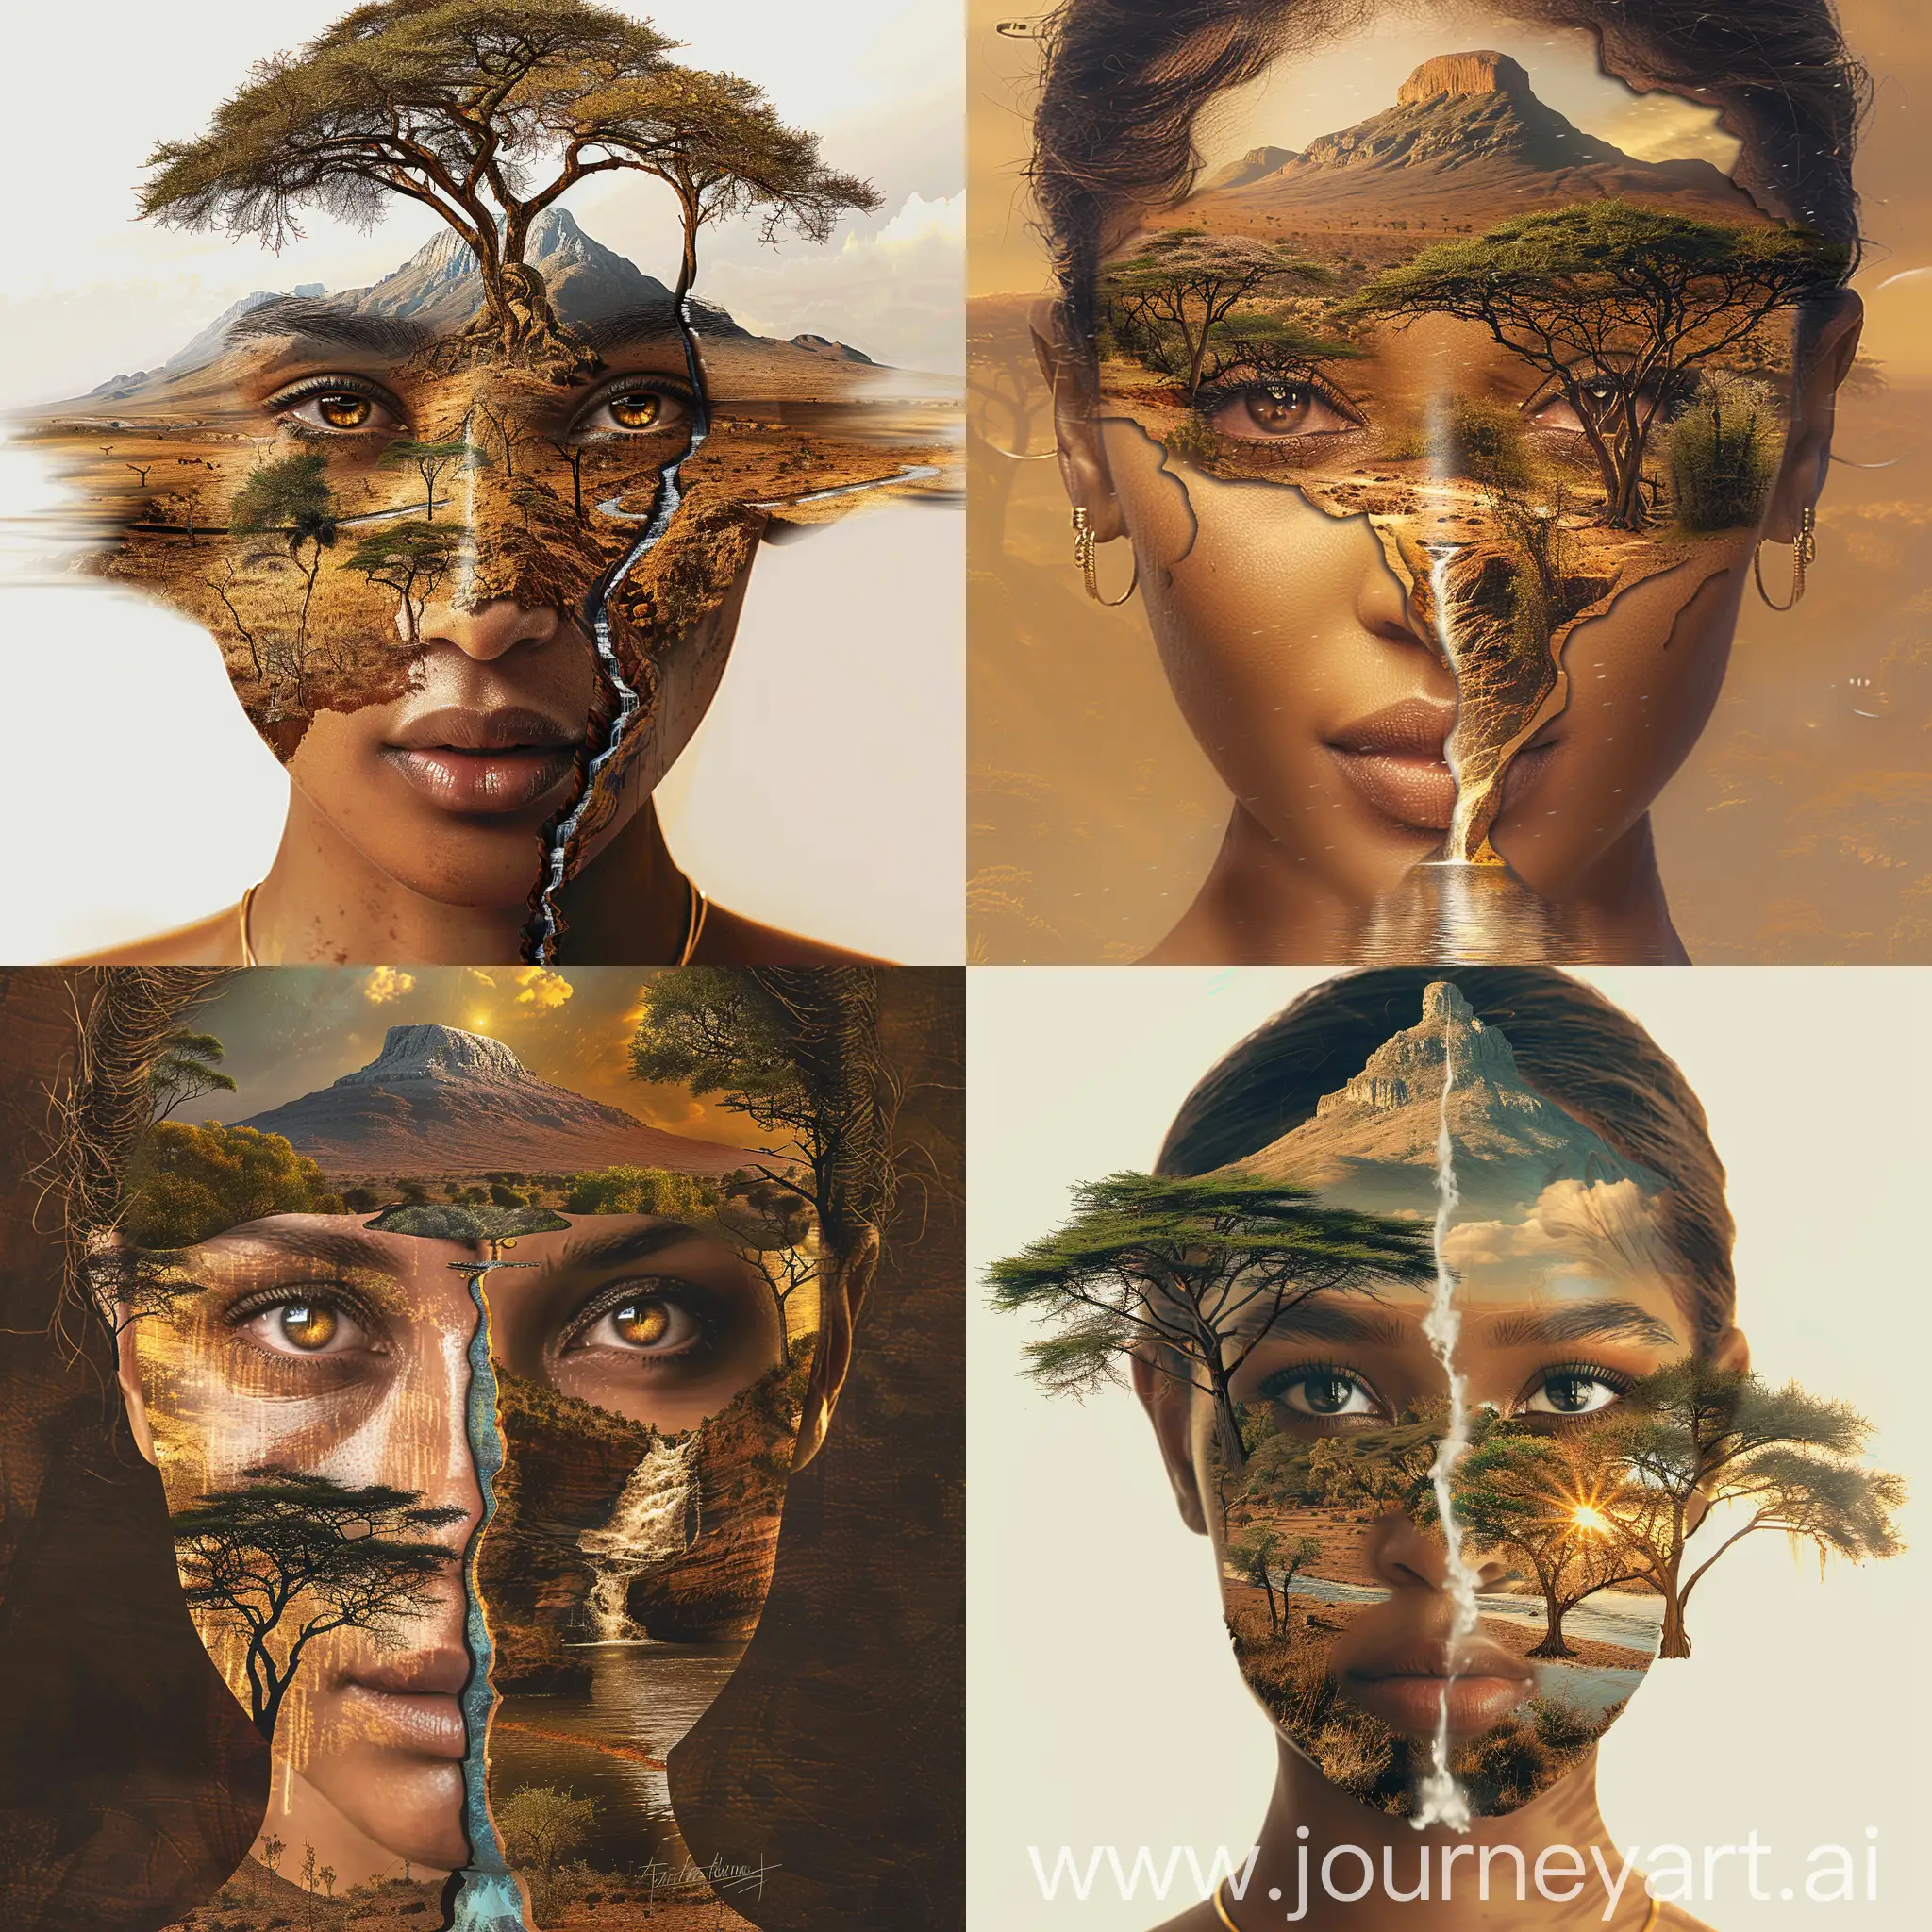 Powerful-Portrait-of-Woman-Merging-with-African-Savannah-Landscape